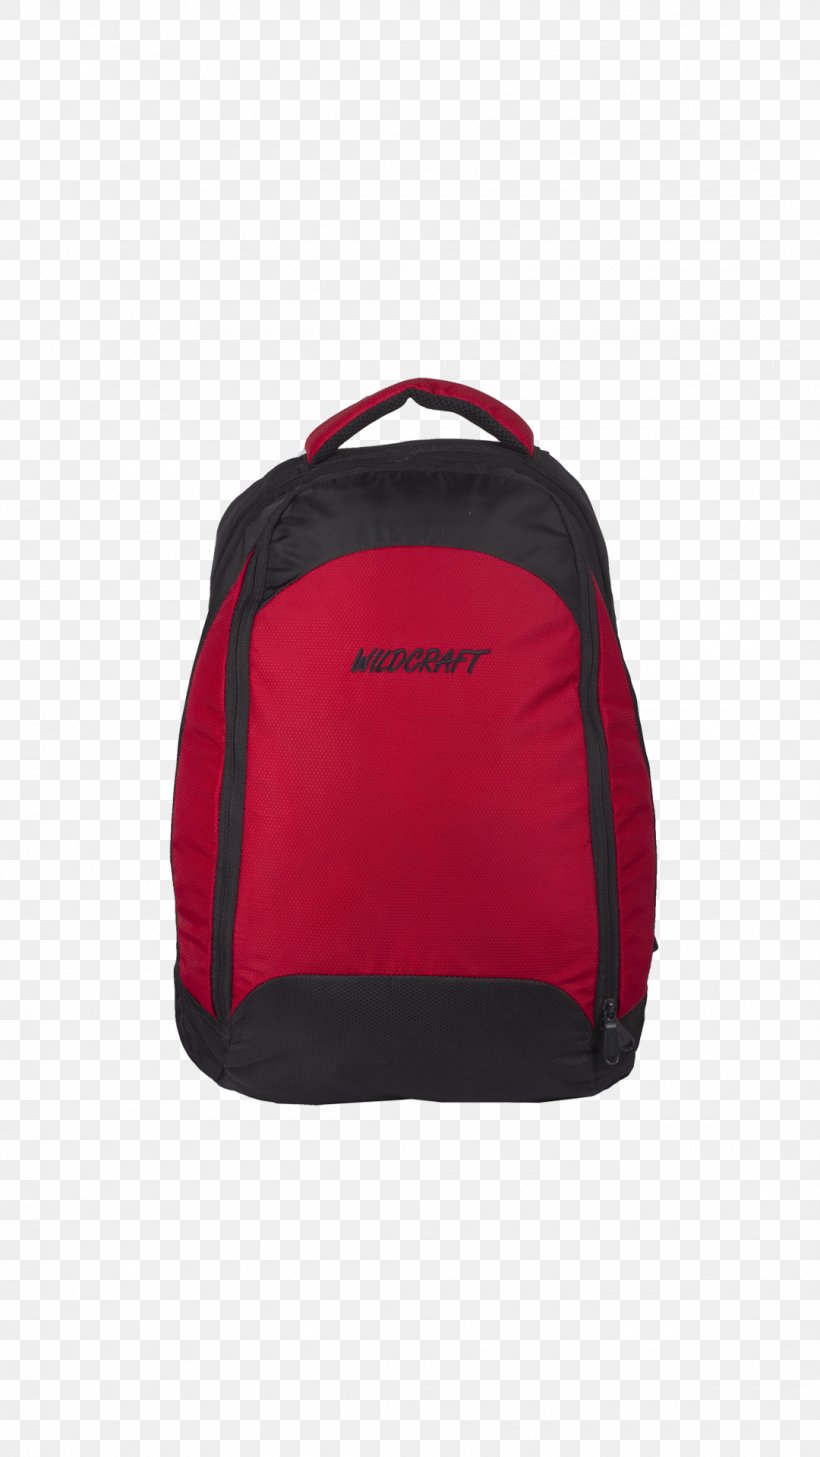 Bag Product Design Backpack, PNG, 1080x1920px, Bag, Backpack, Luggage Bags, Red, Redm Download Free